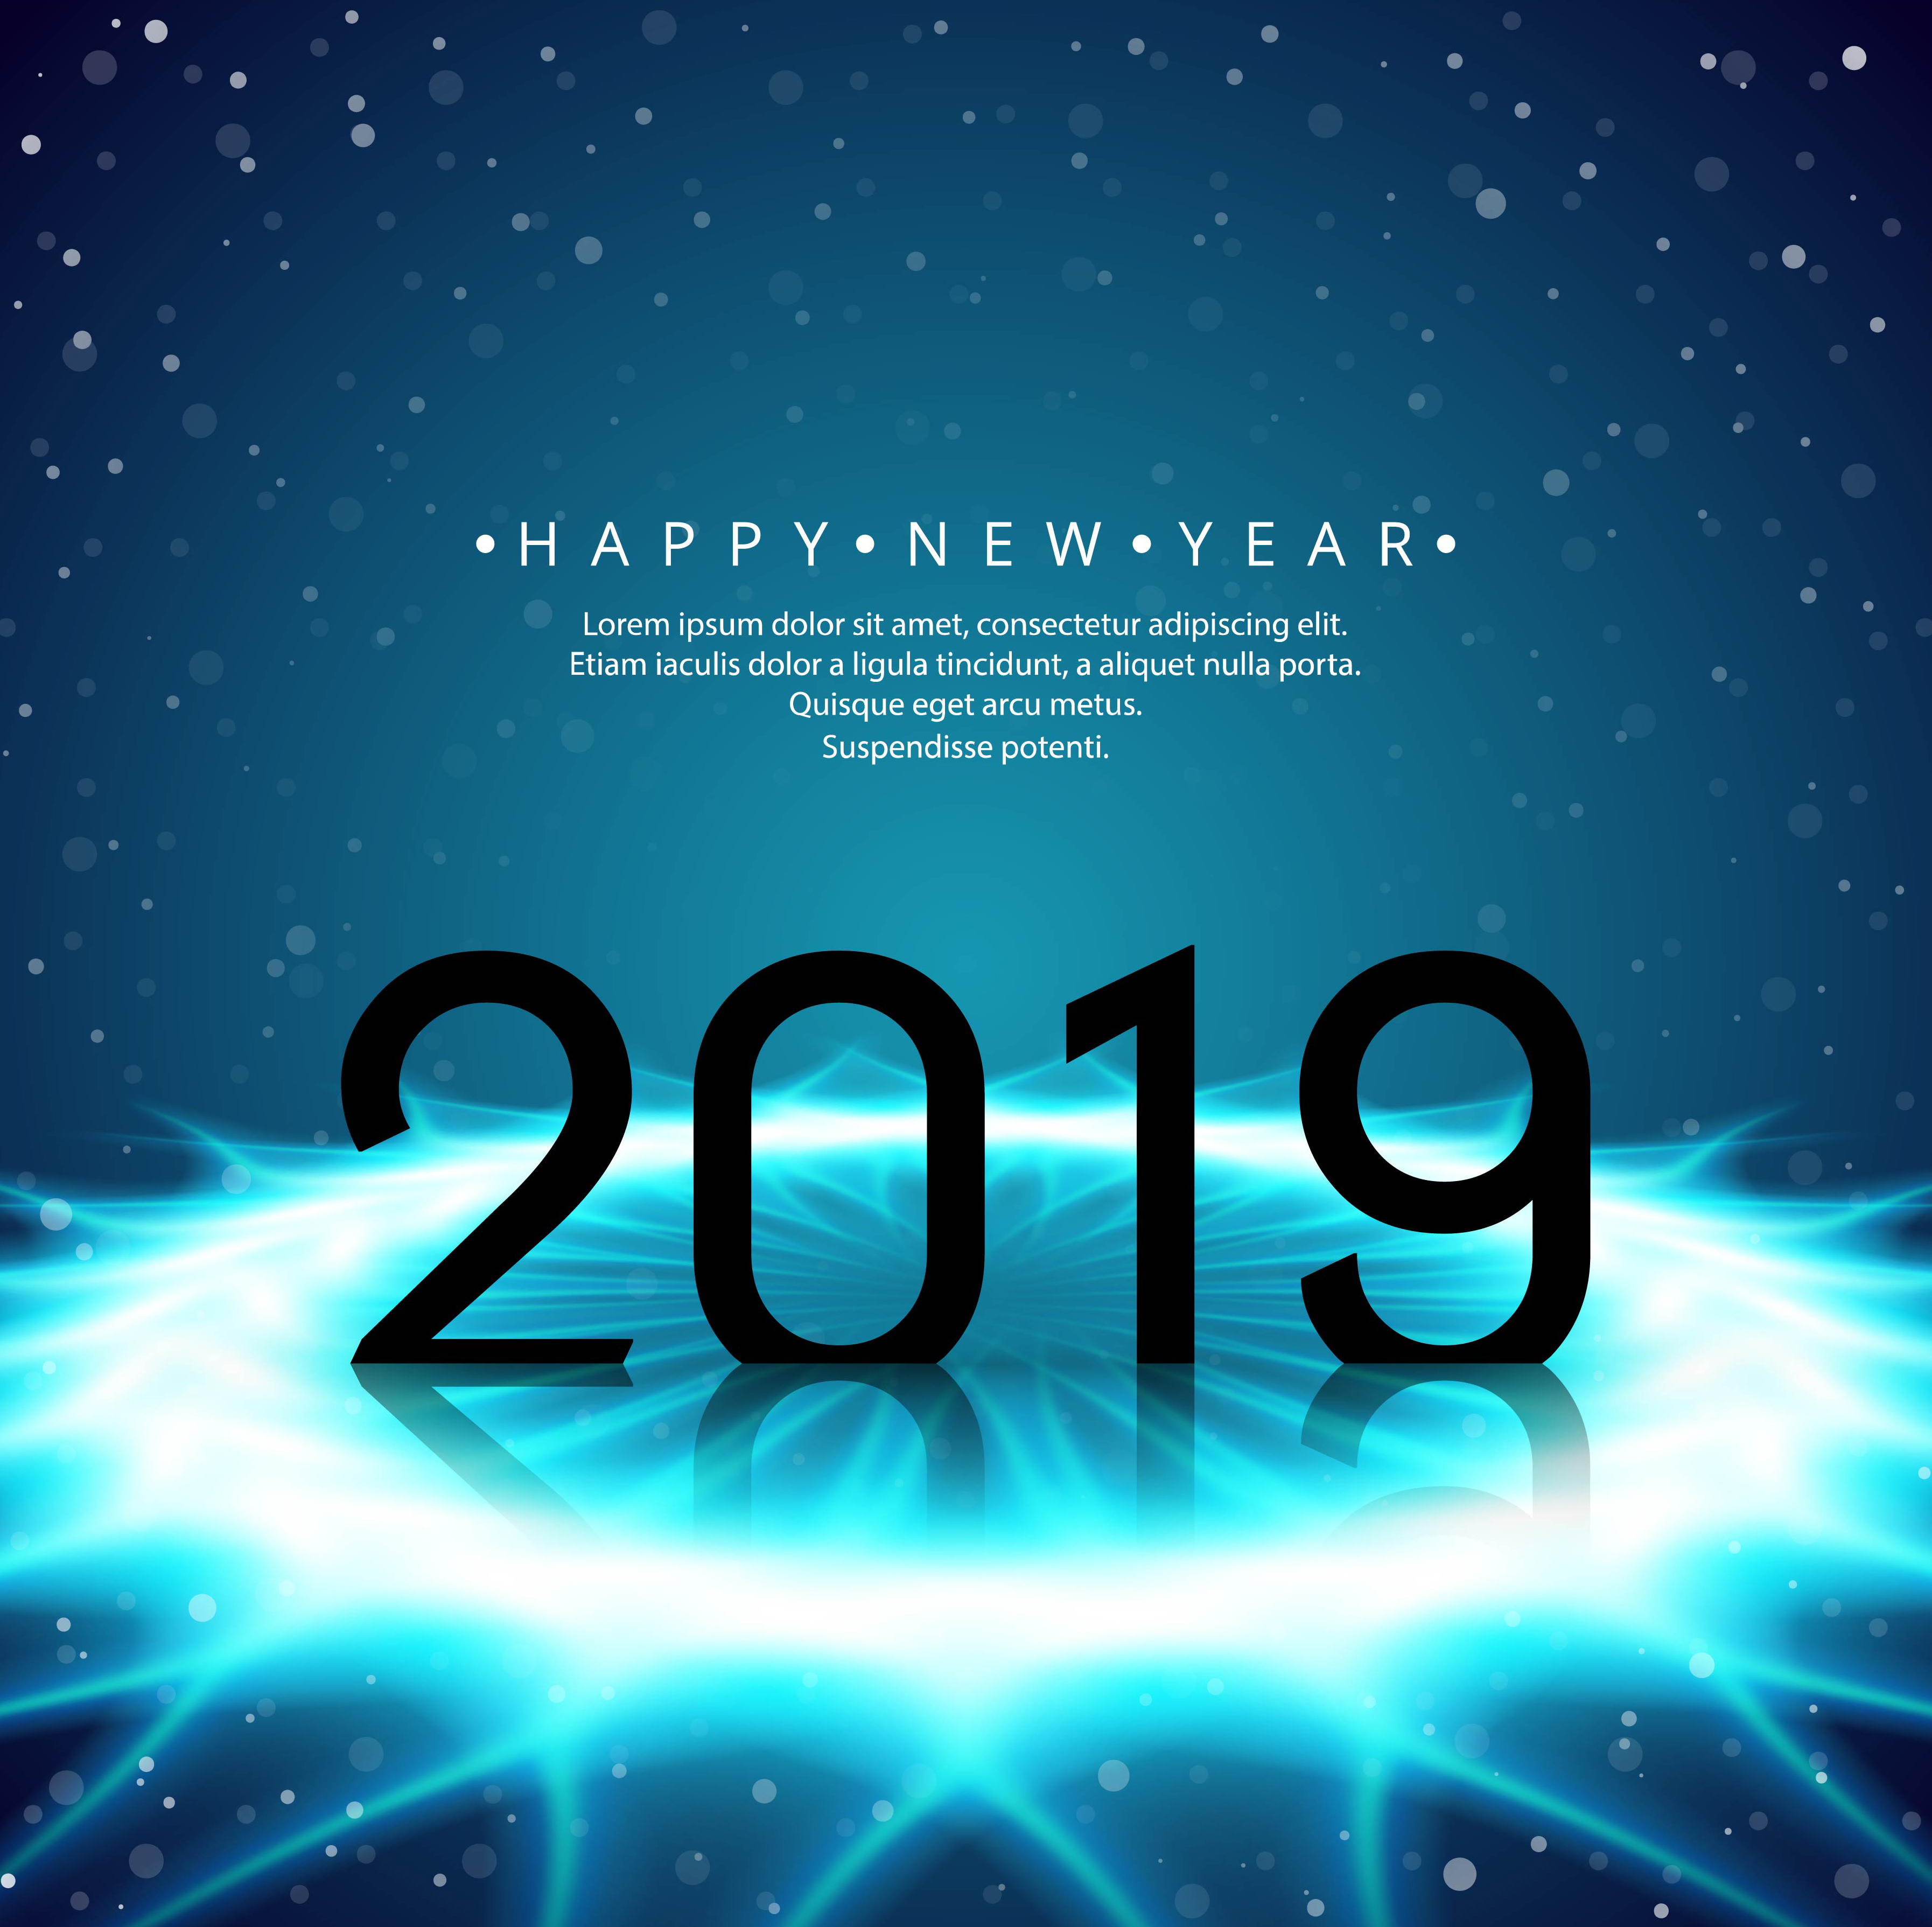 Beautiful Happy New Year 2019 text festival background 266619 Vector